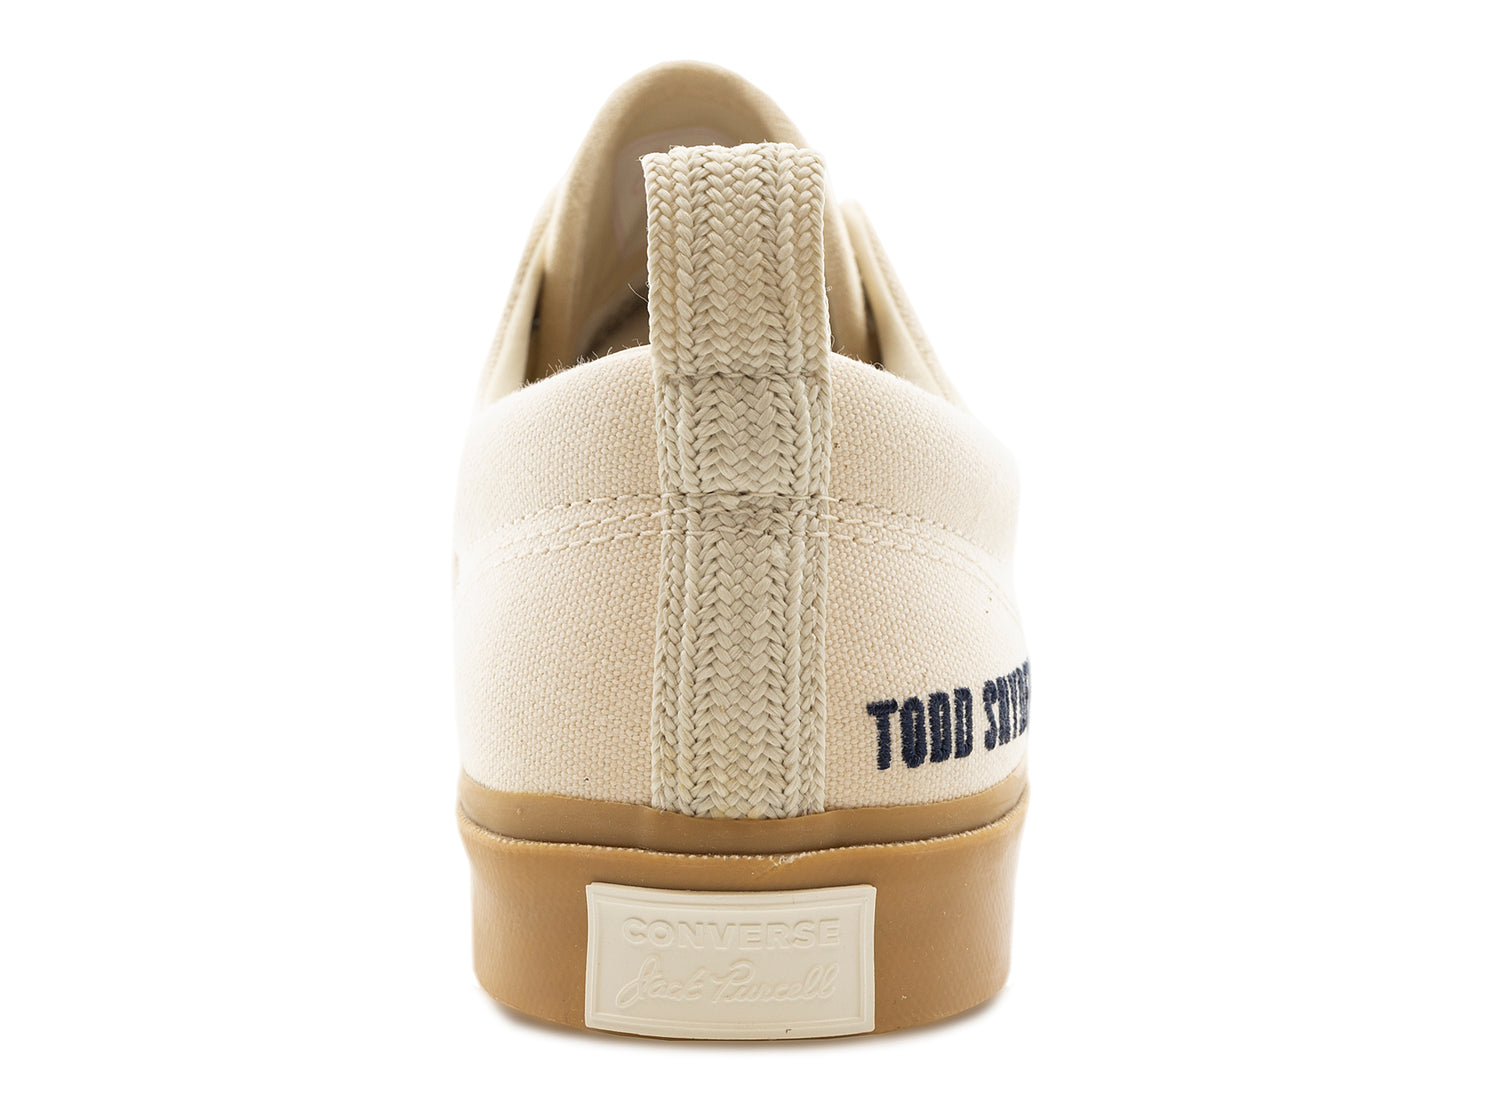 Converse x Todd Purcell Ox – Oneness Boutique